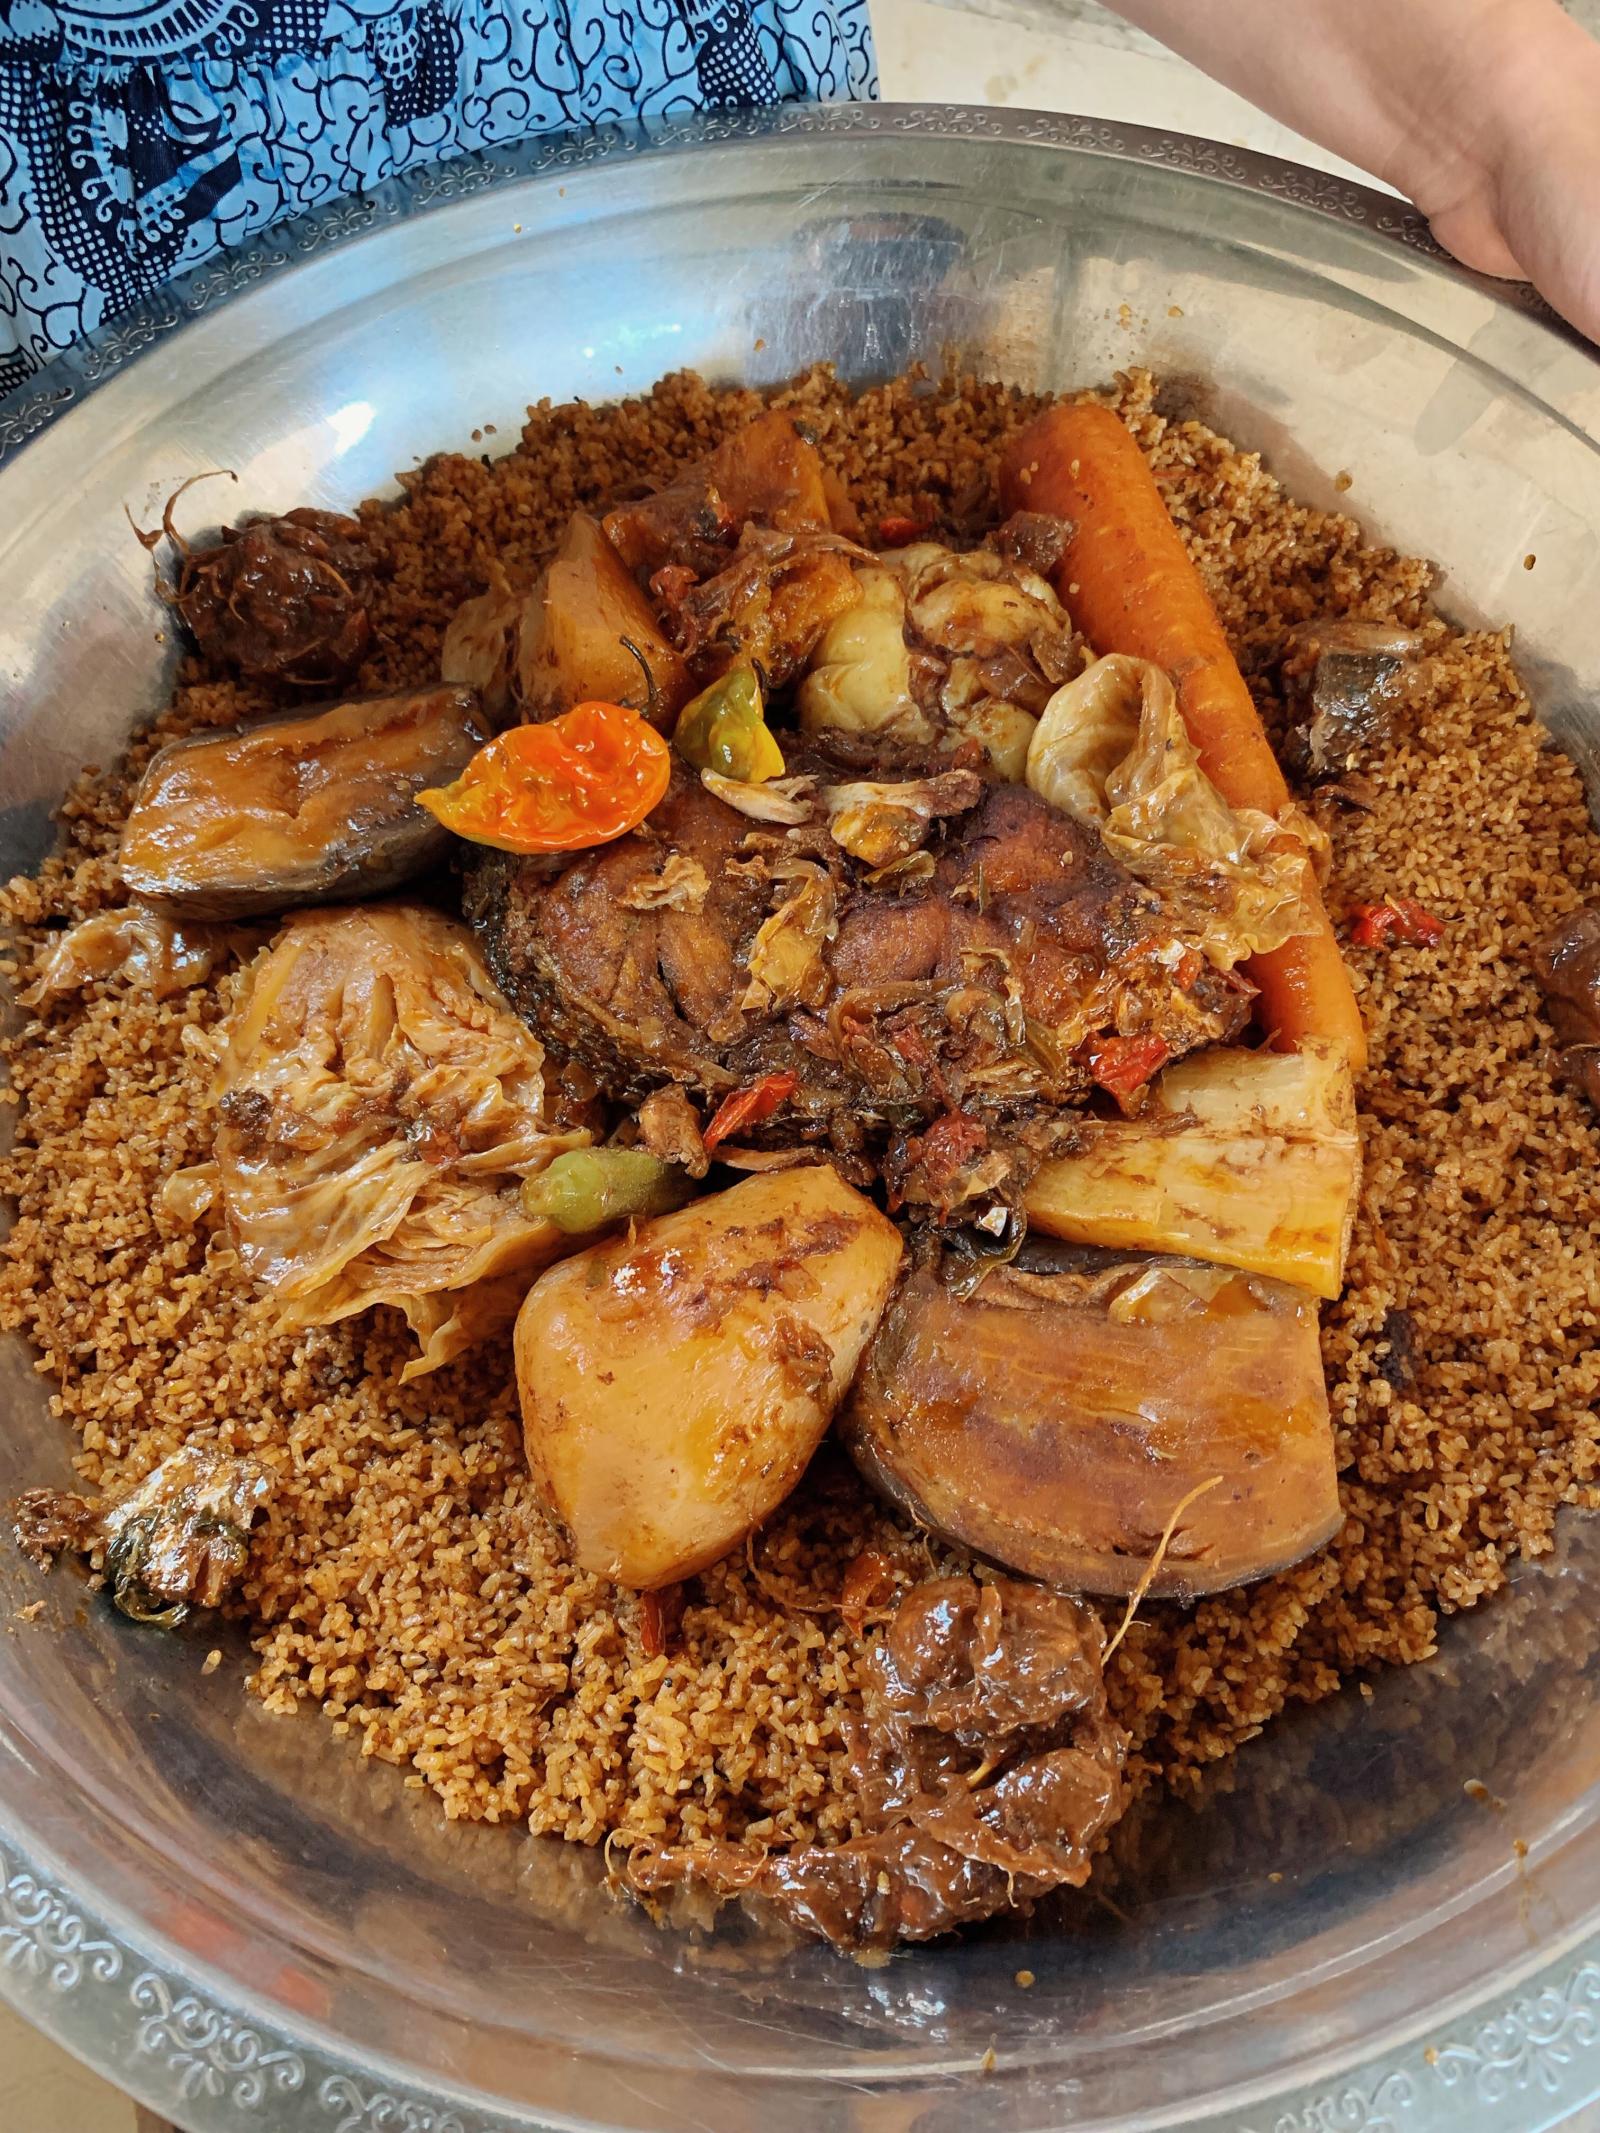 Senegalese meal.